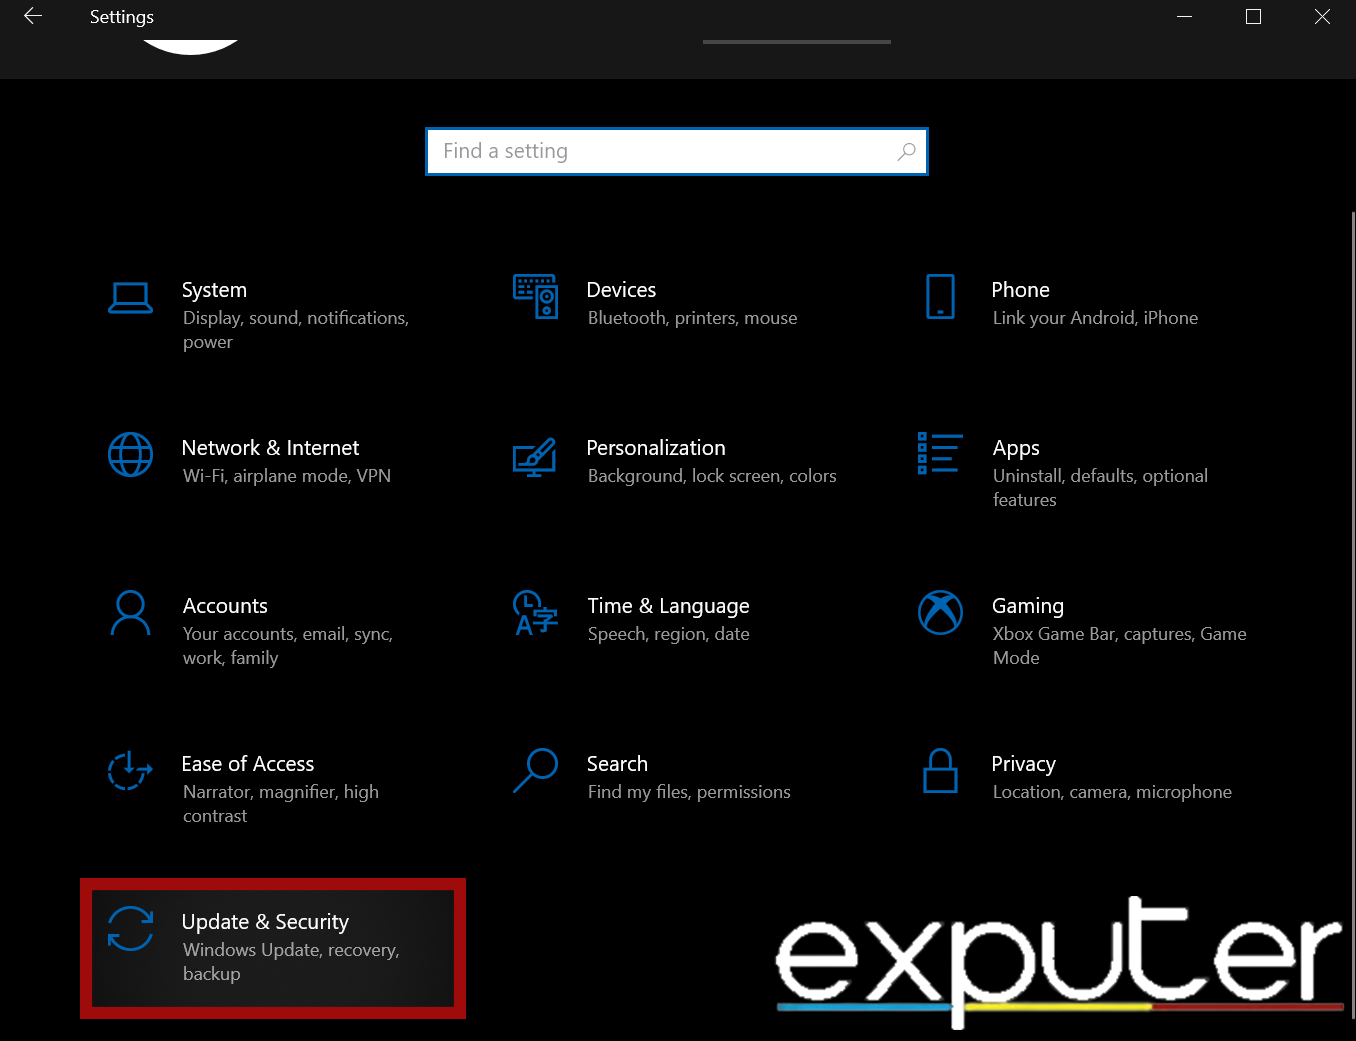 Opening Update and Security Settings in Windows Settings app. (image captured by eXputer)